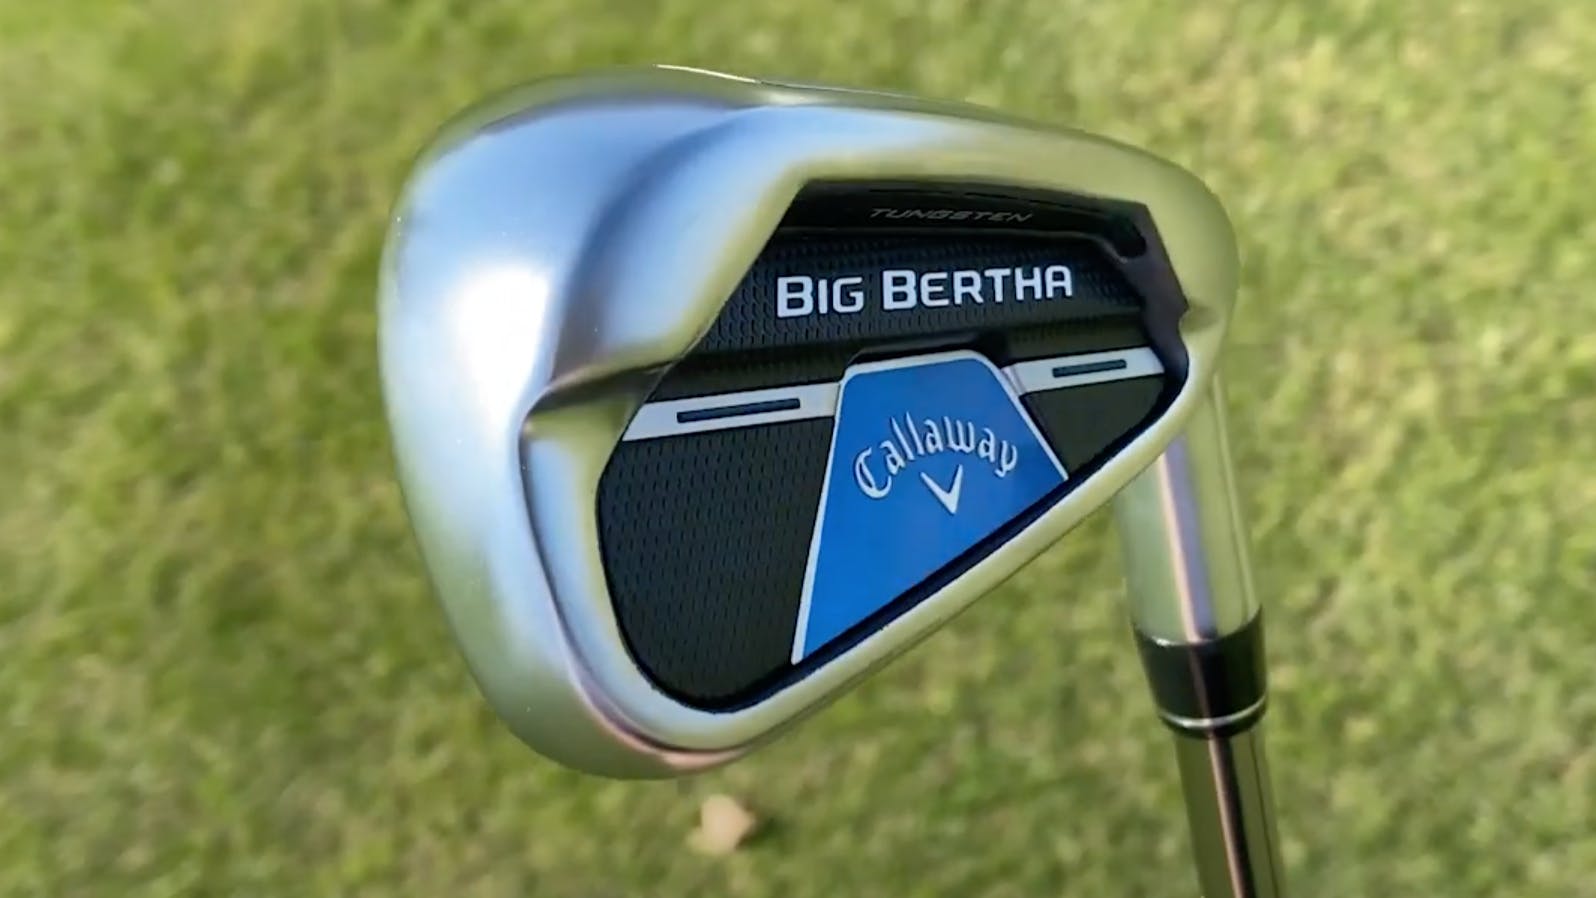 A screenshot from the YouTube video shows a close-up of the clubhead.